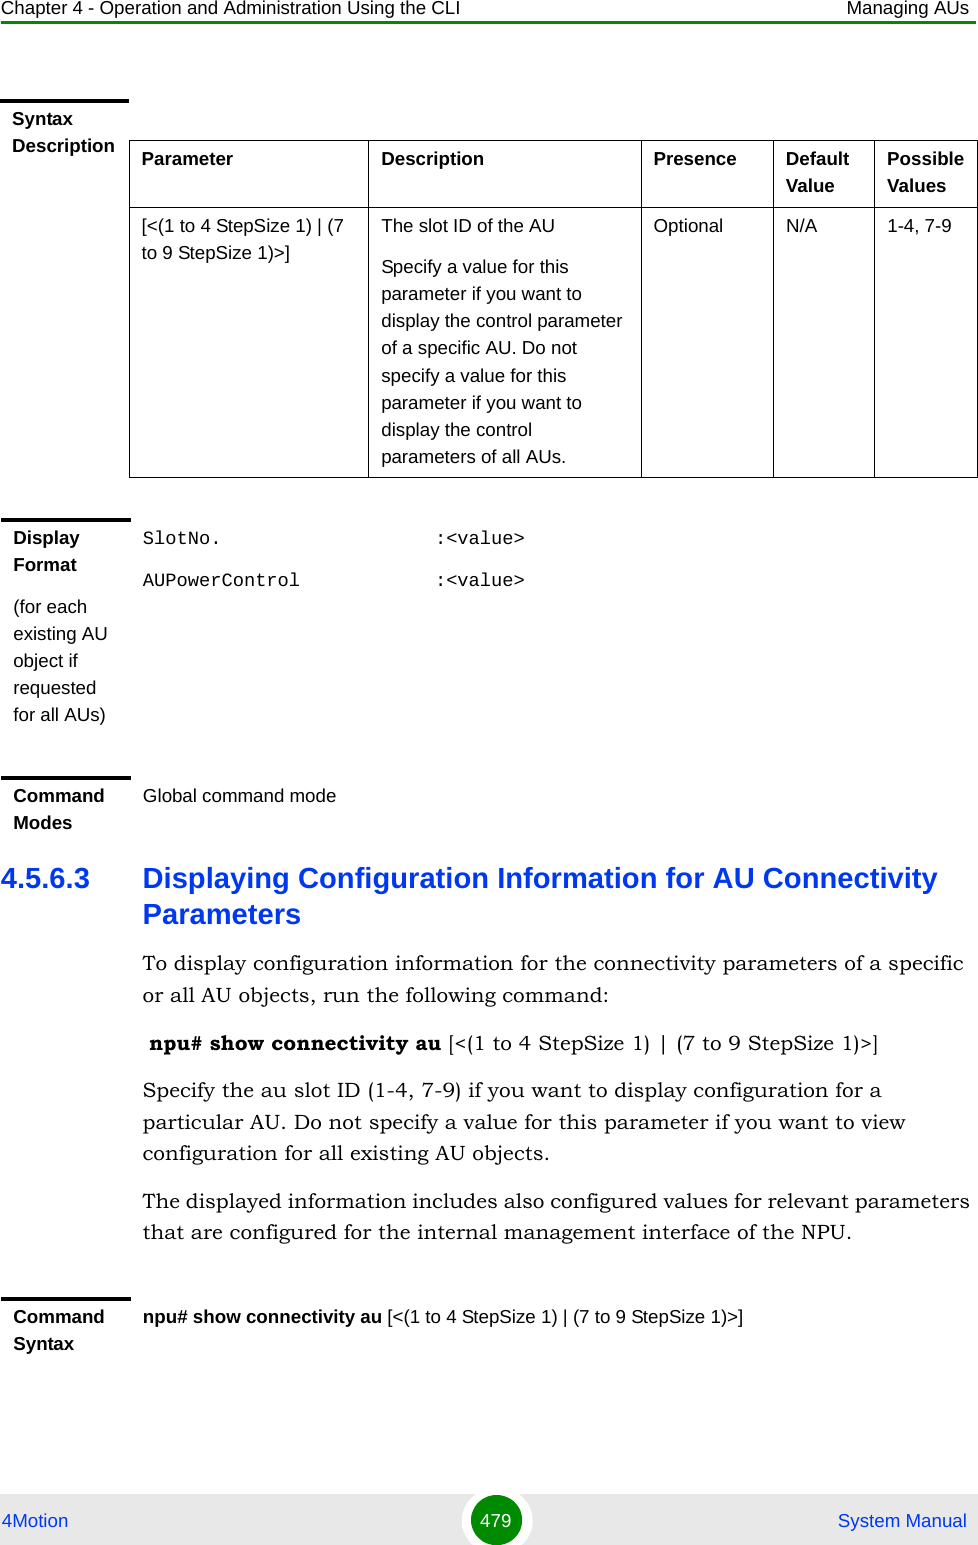 Chapter 4 - Operation and Administration Using the CLI Managing AUs4Motion 479  System Manual4.5.6.3 Displaying Configuration Information for AU Connectivity ParametersTo display configuration information for the connectivity parameters of a specific or all AU objects, run the following command: npu# show connectivity au [&lt;(1 to 4 StepSize 1) | (7 to 9 StepSize 1)&gt;]Specify the au slot ID (1-4, 7-9) if you want to display configuration for a particular AU. Do not specify a value for this parameter if you want to view configuration for all existing AU objects.The displayed information includes also configured values for relevant parameters that are configured for the internal management interface of the NPU.Syntax Description Parameter Description Presence Default ValuePossible Values[&lt;(1 to 4 StepSize 1) | (7 to 9 StepSize 1)&gt;]The slot ID of the AU Specify a value for this parameter if you want to display the control parameter of a specific AU. Do not specify a value for this parameter if you want to display the control parameters of all AUs.Optional N/A 1-4, 7-9Display Format(for each existing AU object if requested for all AUs)SlotNo.                   :&lt;value&gt;AUPowerControl            :&lt;value&gt;Command ModesGlobal command modeCommand Syntaxnpu# show connectivity au [&lt;(1 to 4 StepSize 1) | (7 to 9 StepSize 1)&gt;]